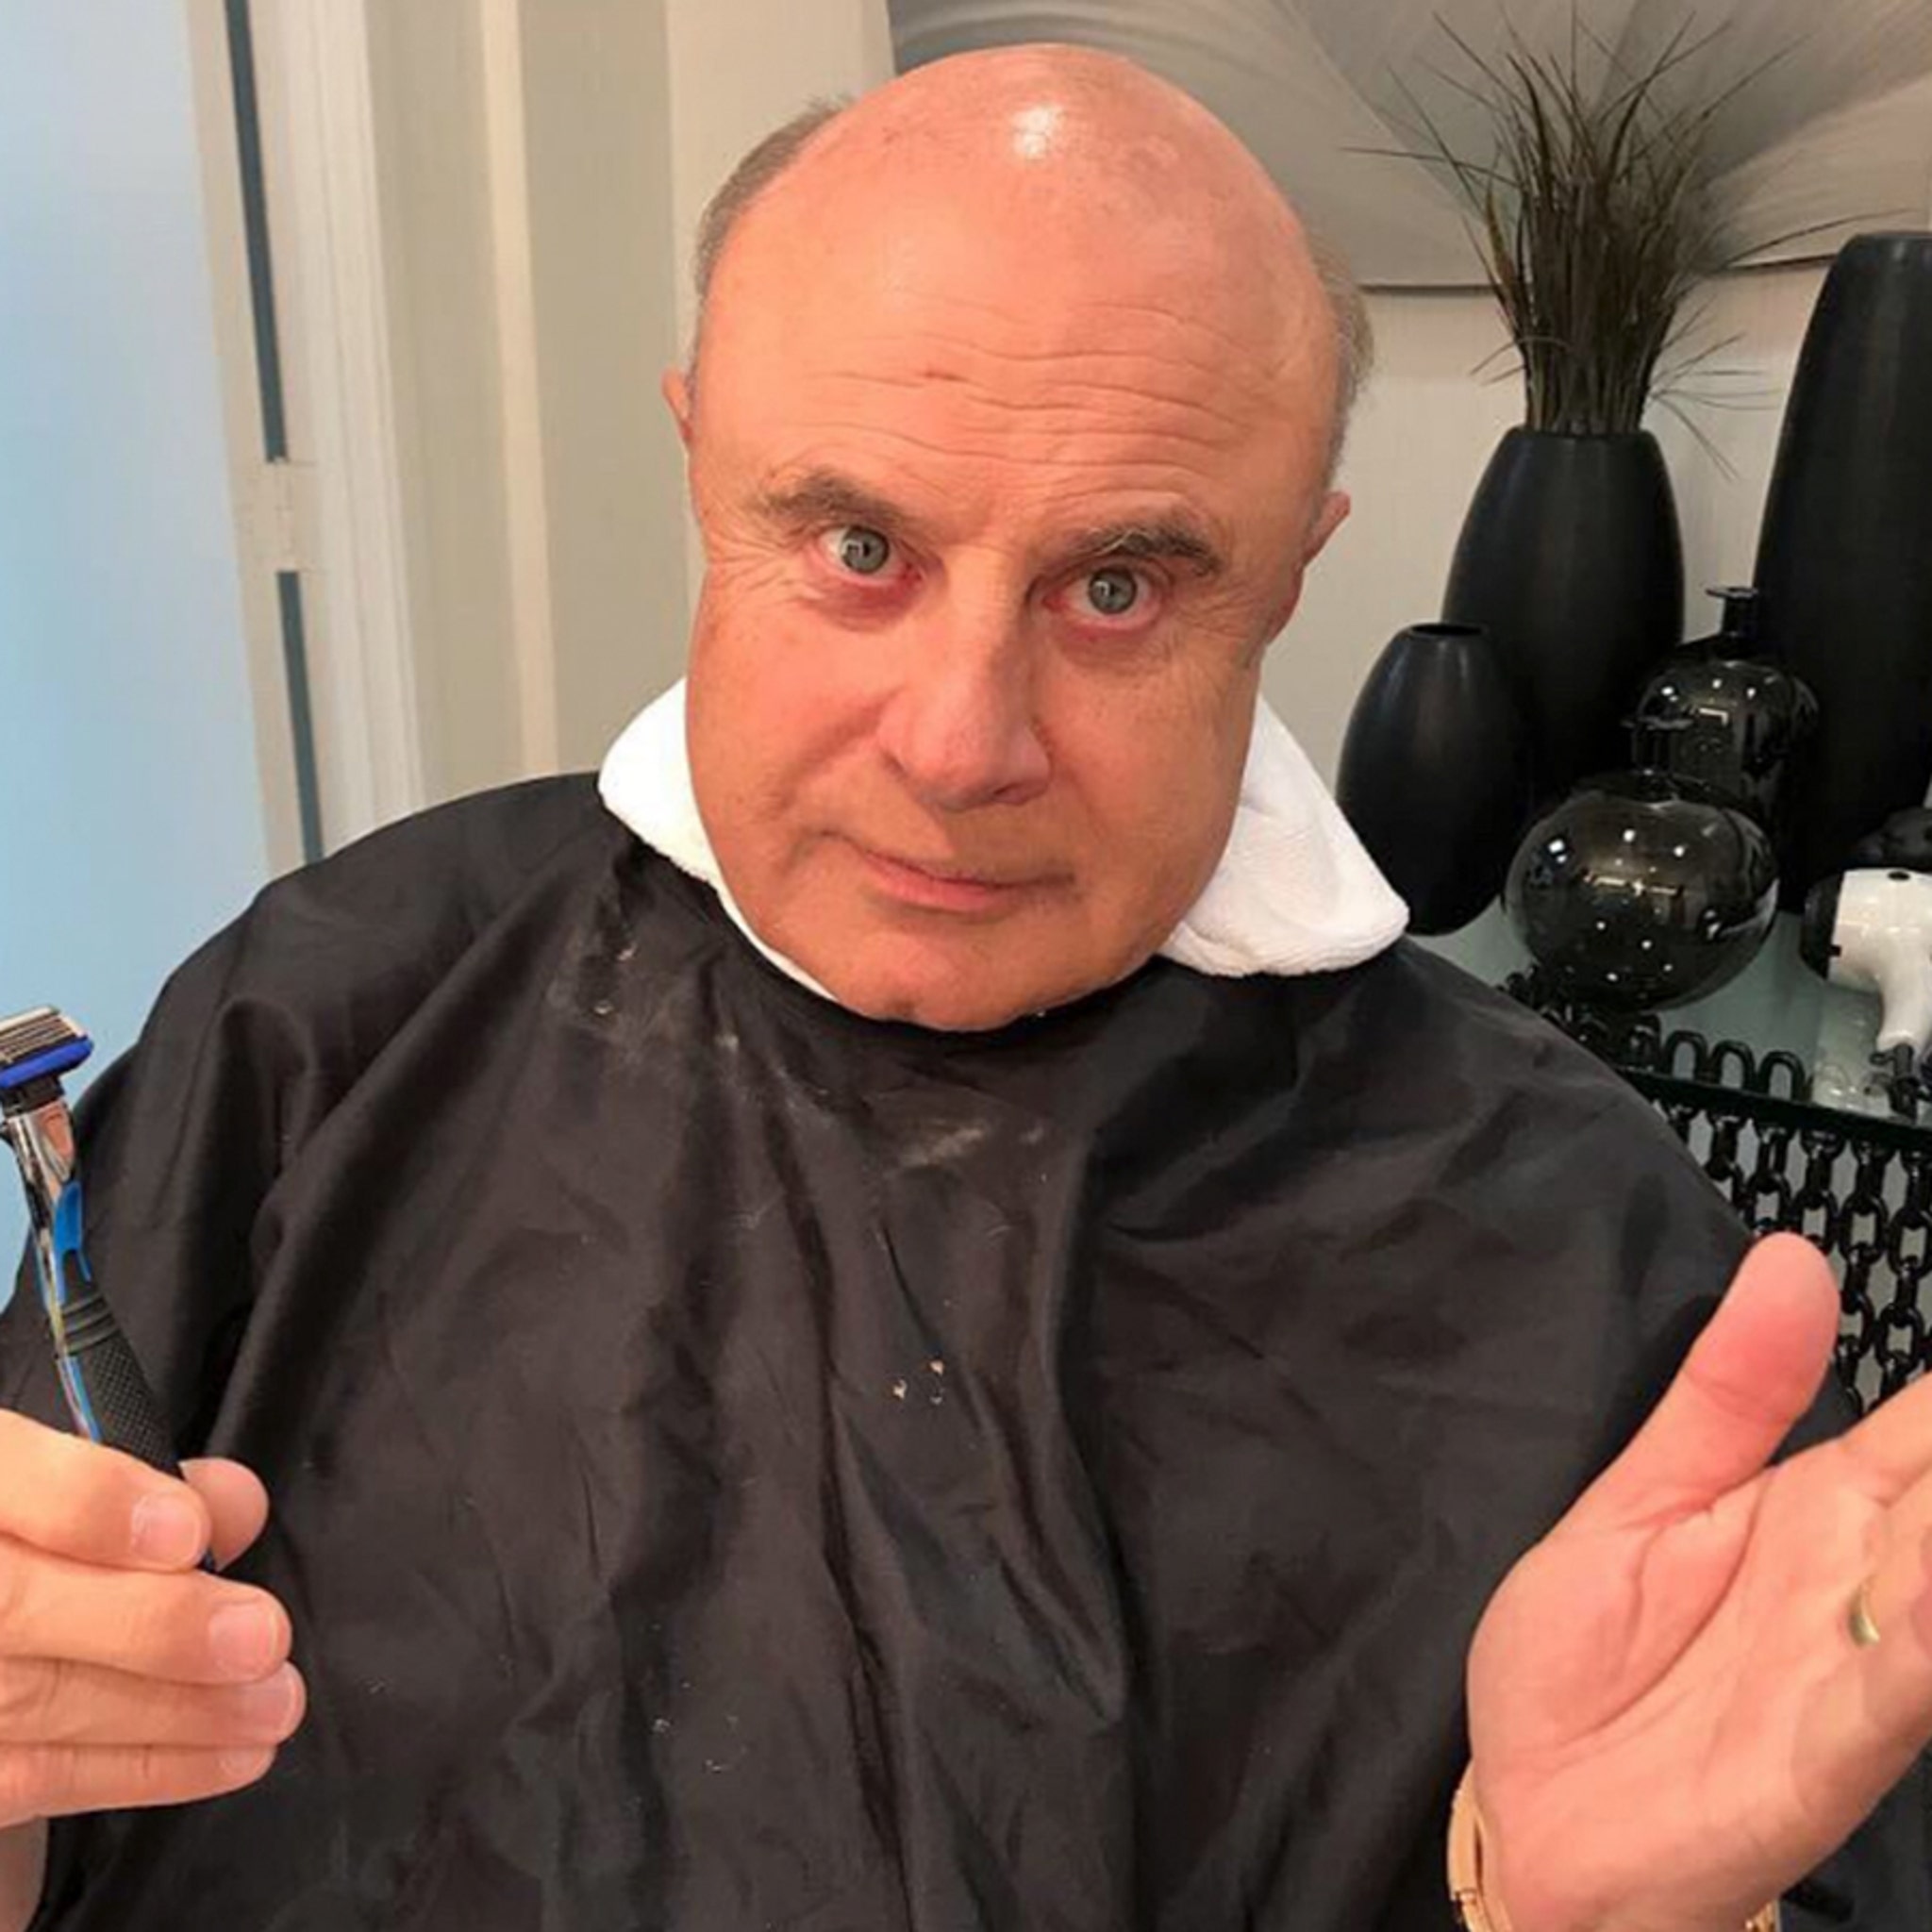 Dr. Phil to Shave Iconic on April Fools' Day